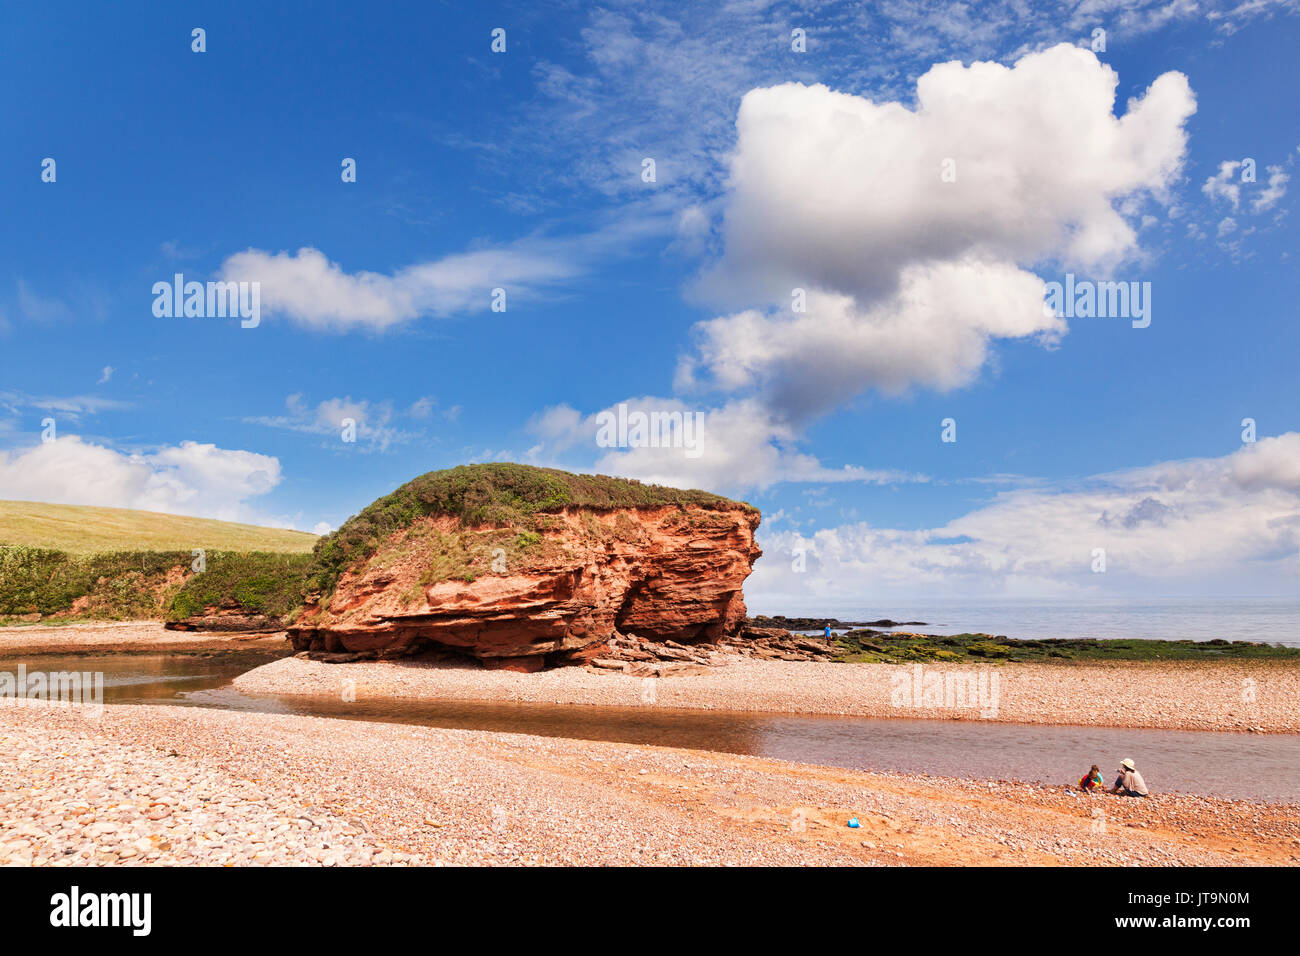 26 June 2017: Budleigh Salterton, East Devon, England, UK - The beach and cliffs under a spectacular blue sky, with magnificent white clouds. Stock Photo